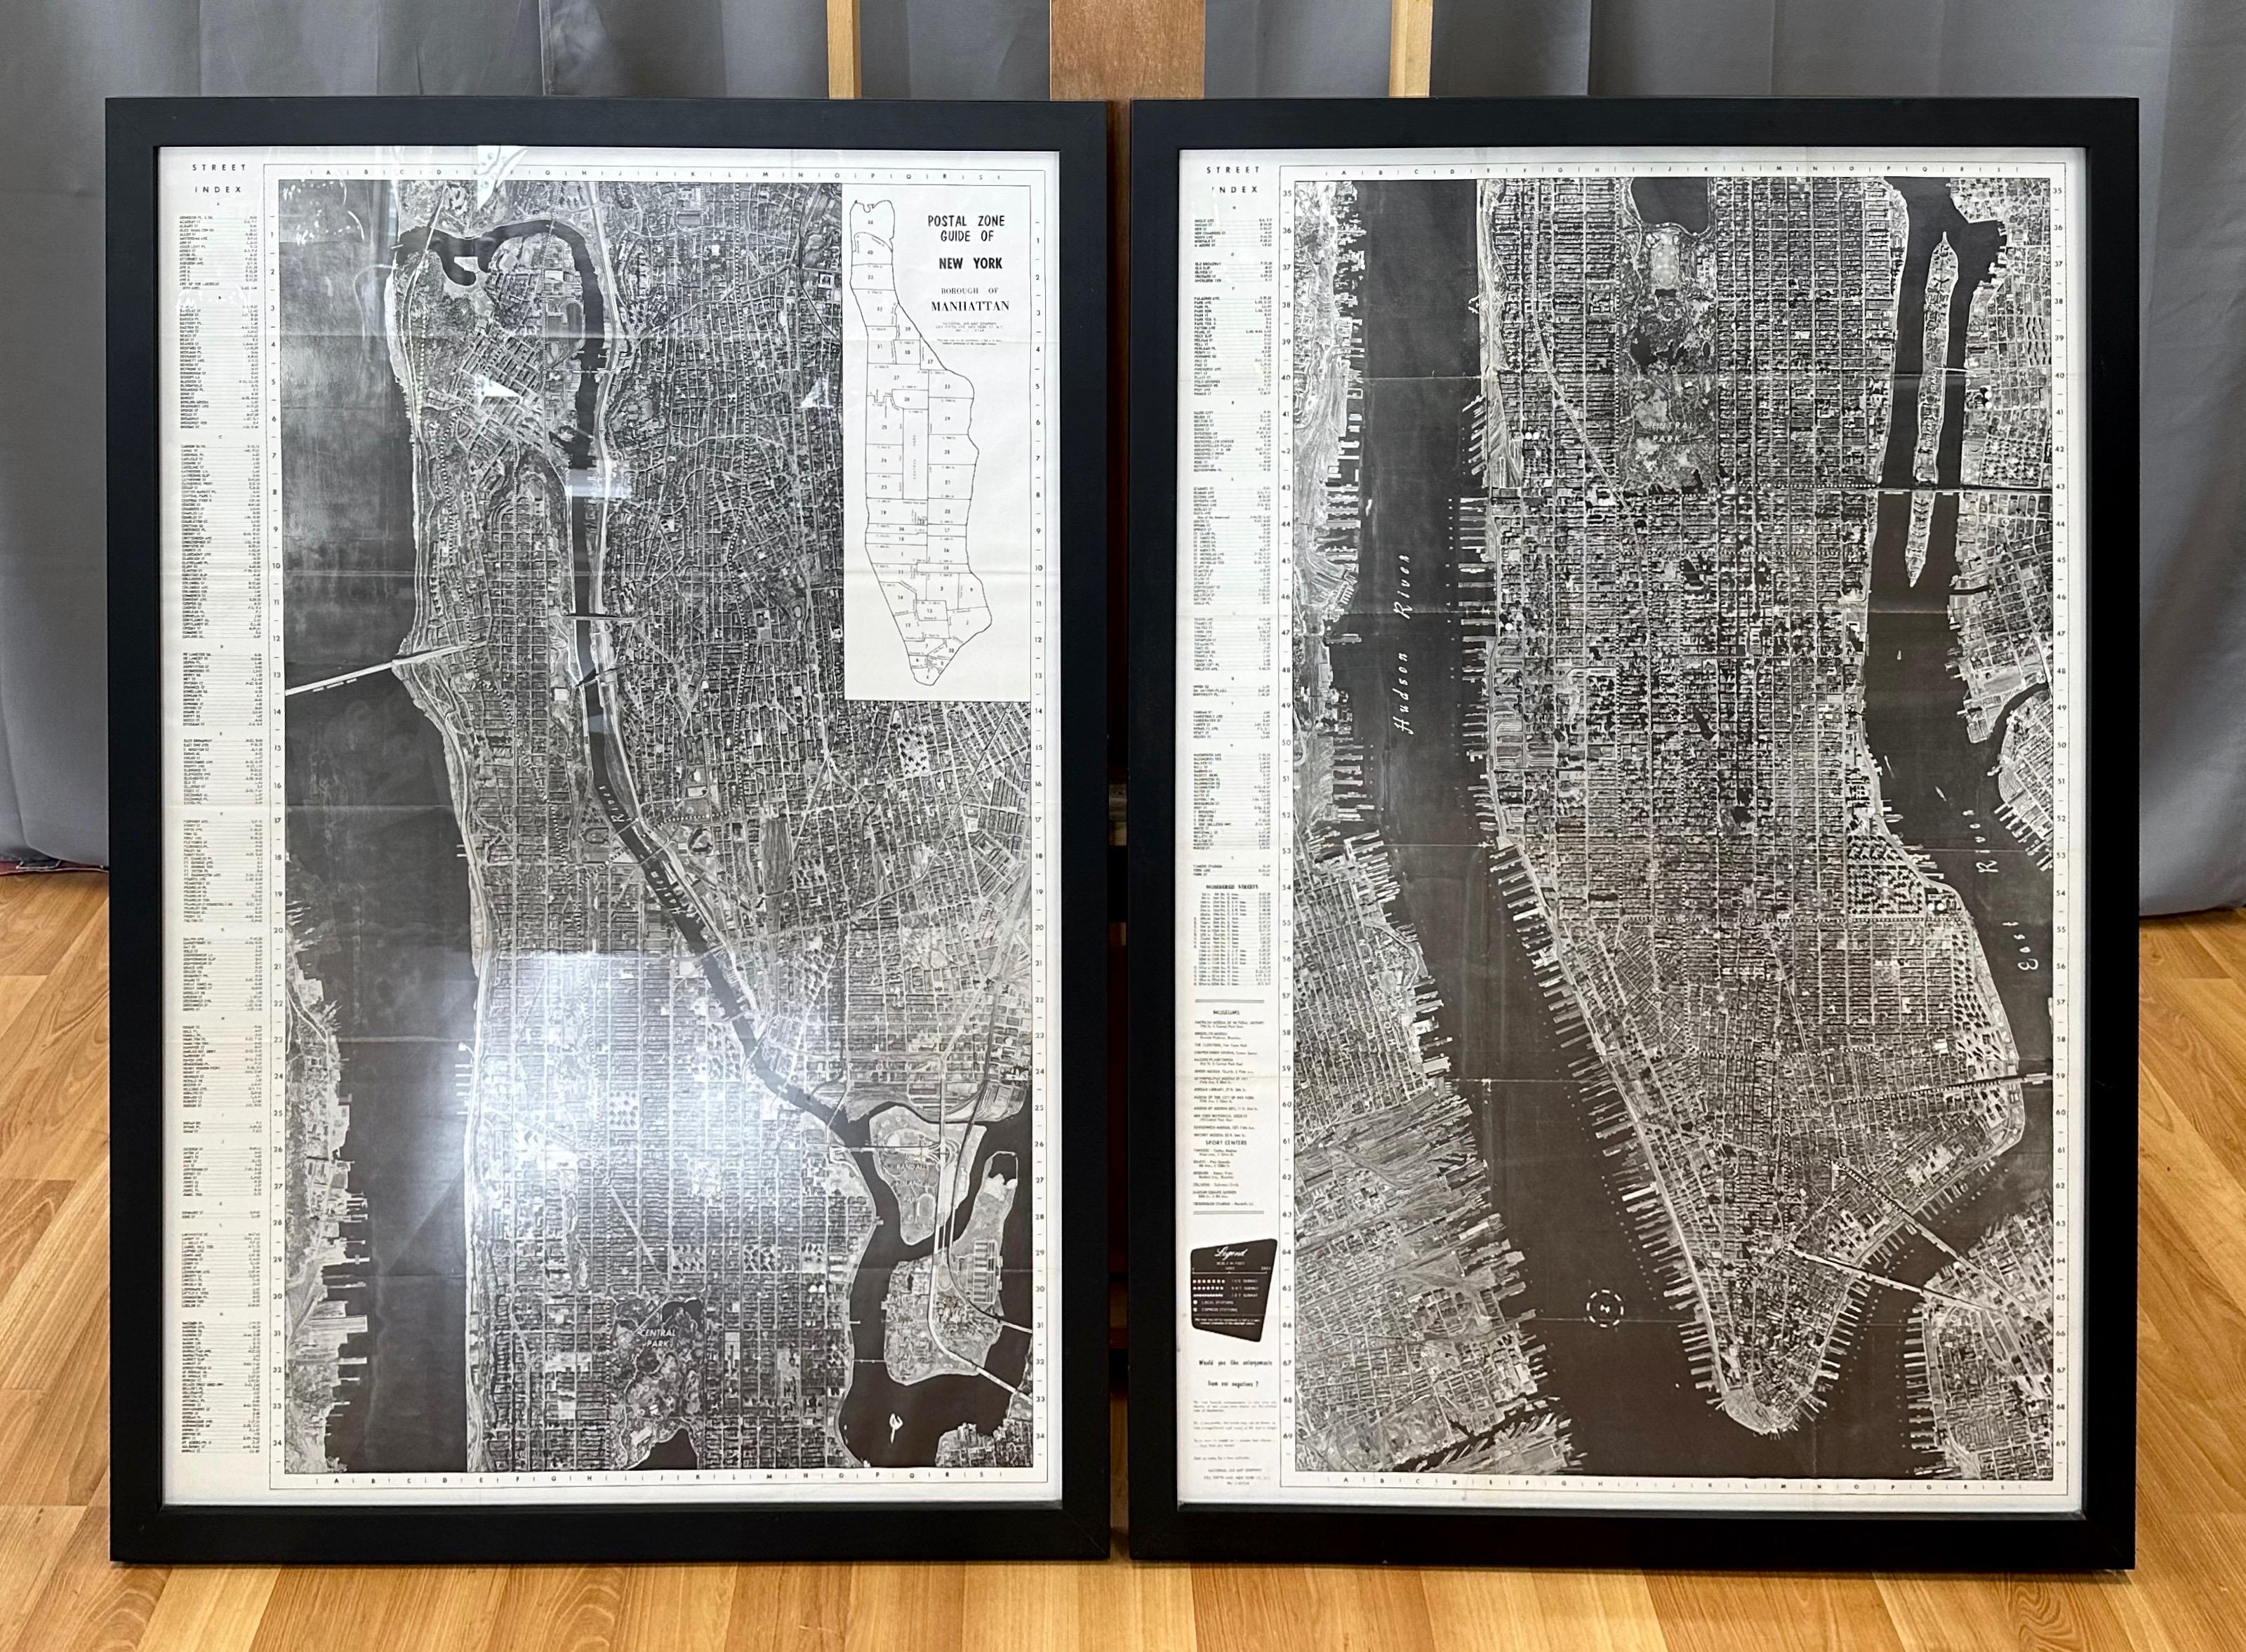 A monumental and rare circa 1955 framed two-piece aerial photographic map of the borough of Manhattan in New York City by the National Air Map Company, including its original cover sheet.

Titled “Postal Zone Guide of New York – Borough of